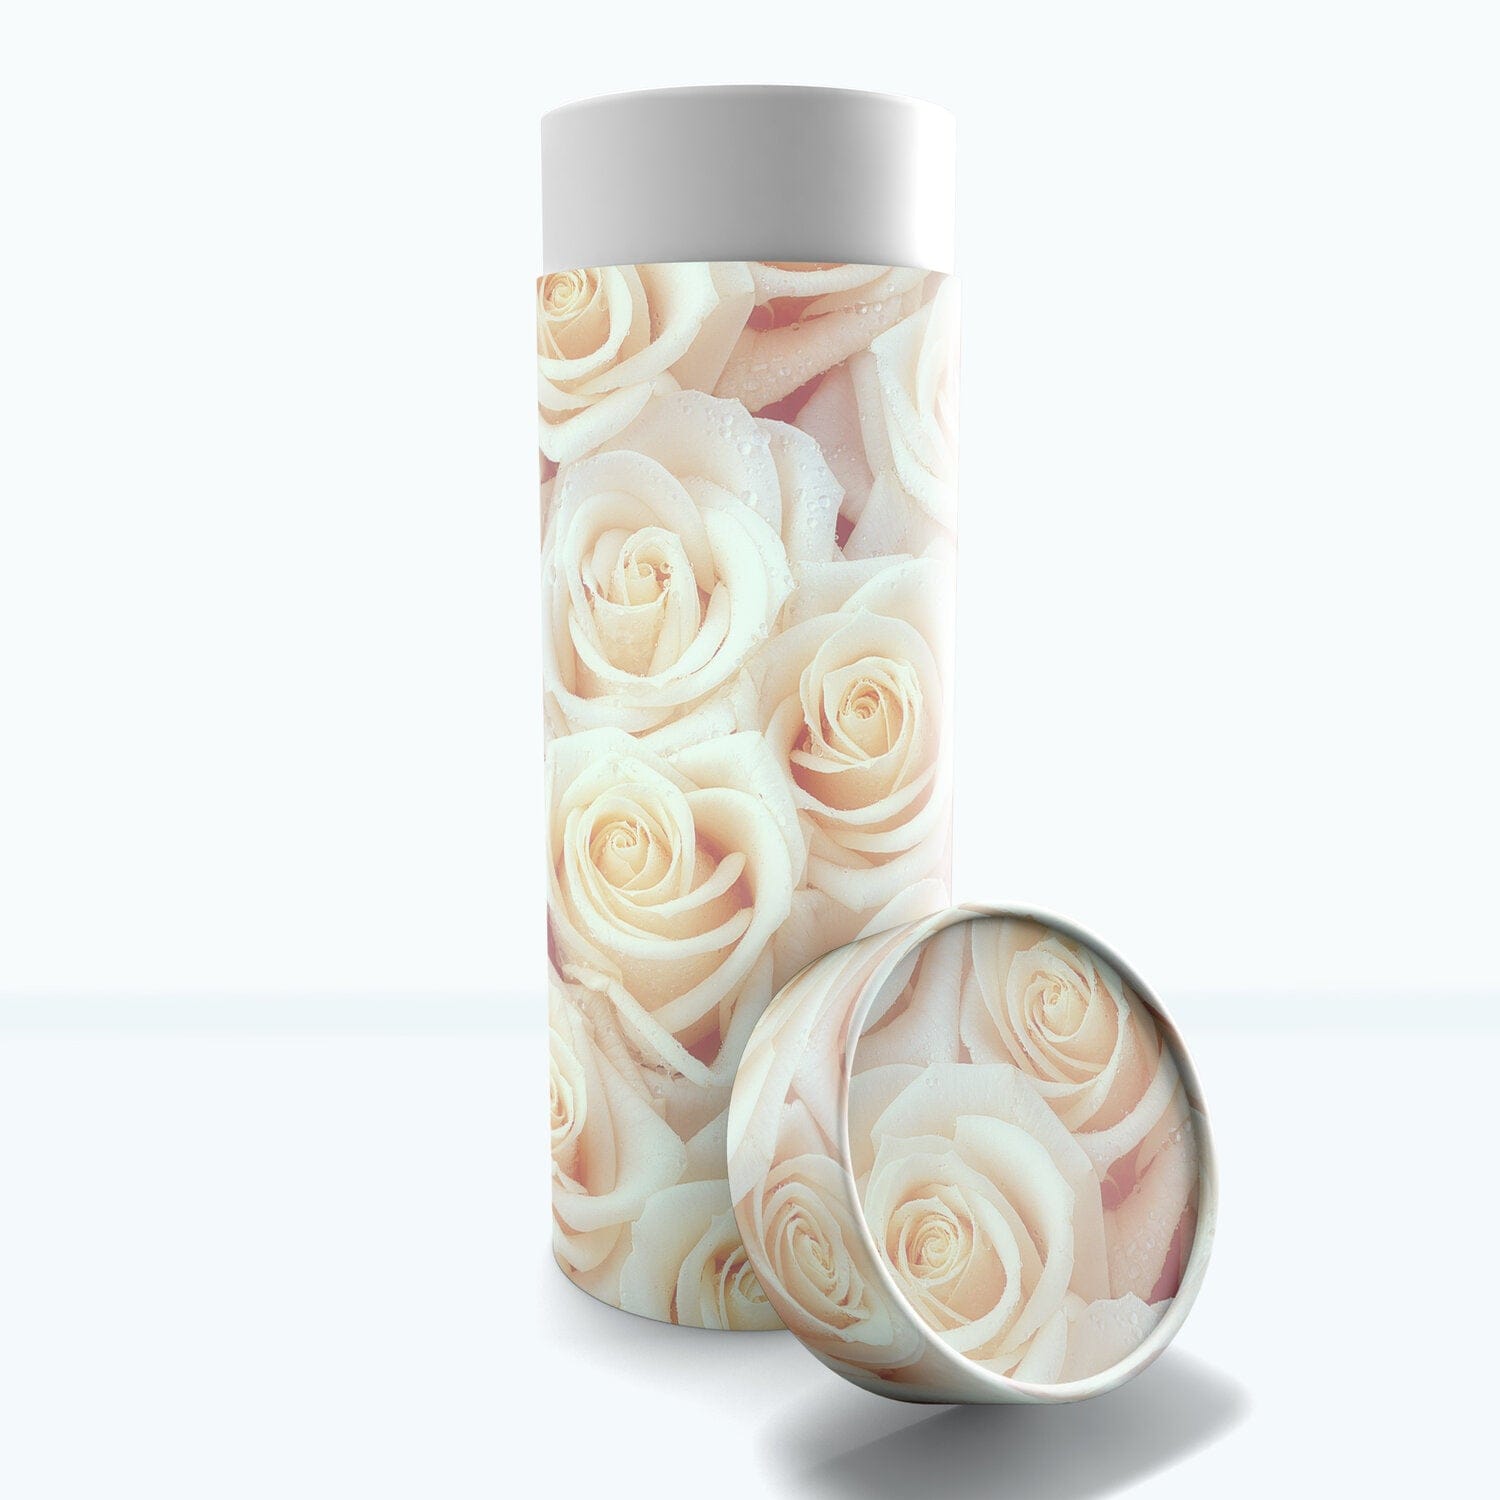 Commemorative Cremation Urns Small White Roses Biodegradable & Eco Friendly Burial or Scattering Urn / Tube